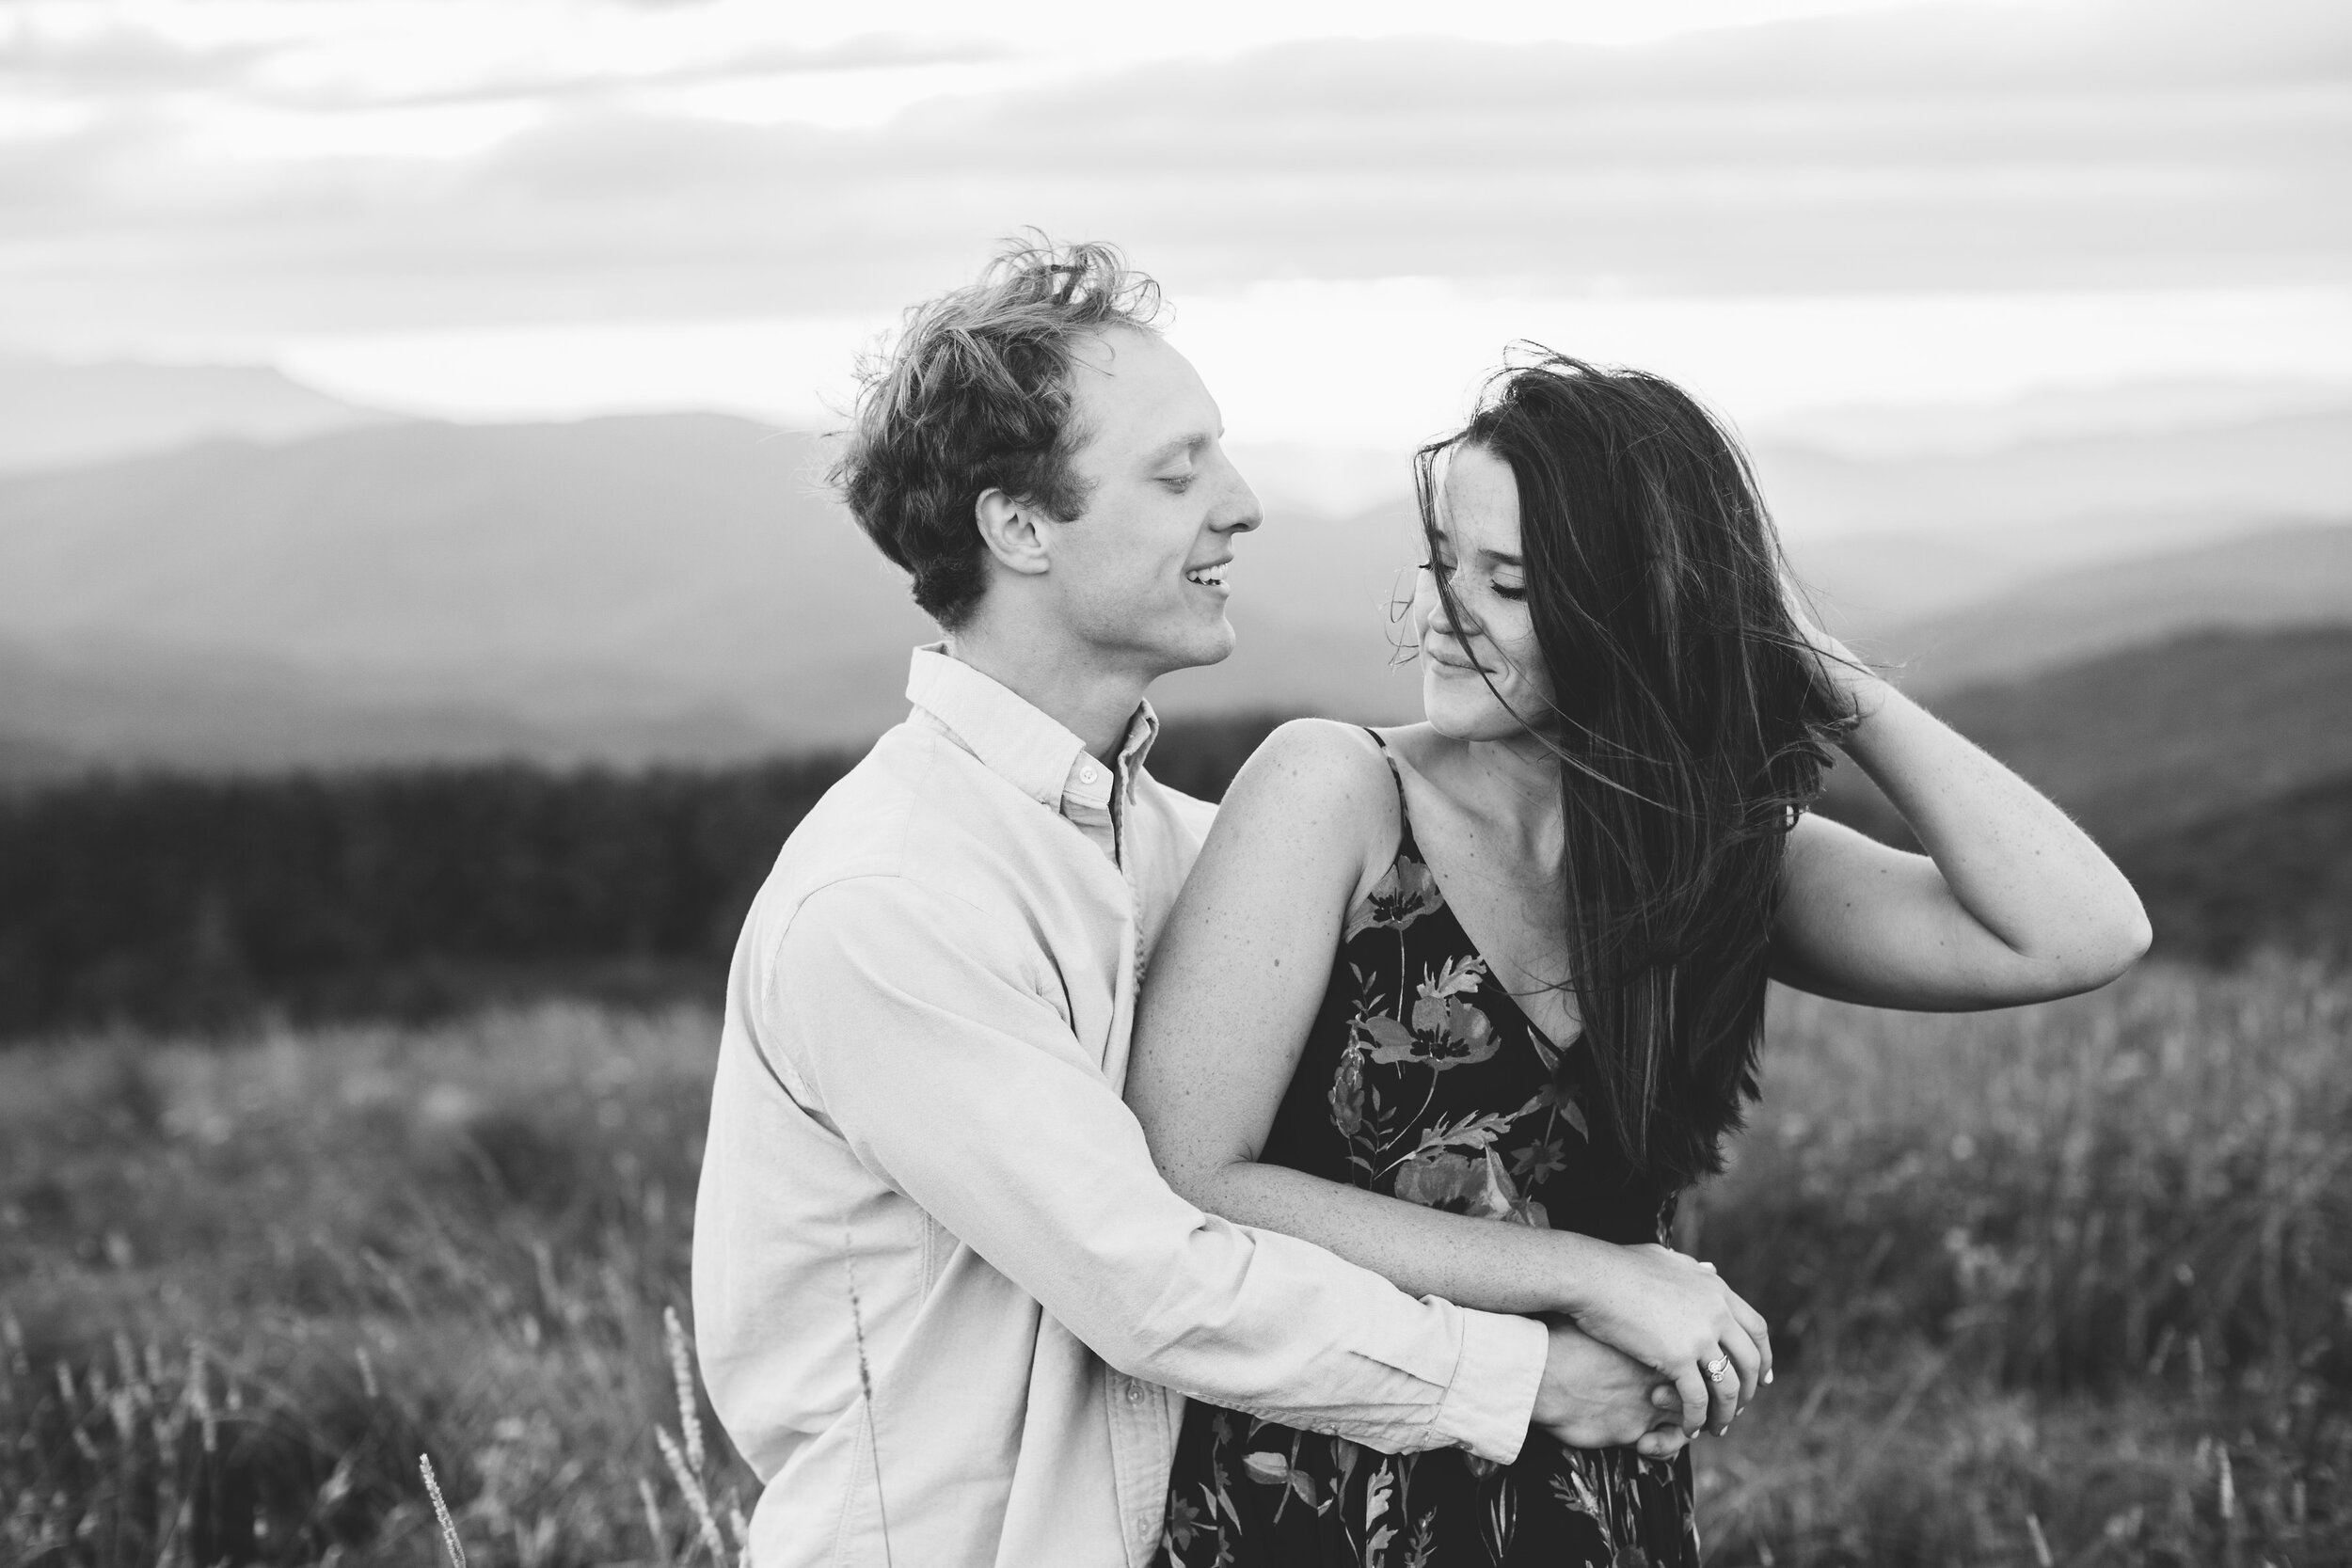 Max Patch Summer Engagement Photos on the Mountain at Sunset wind blowing hair